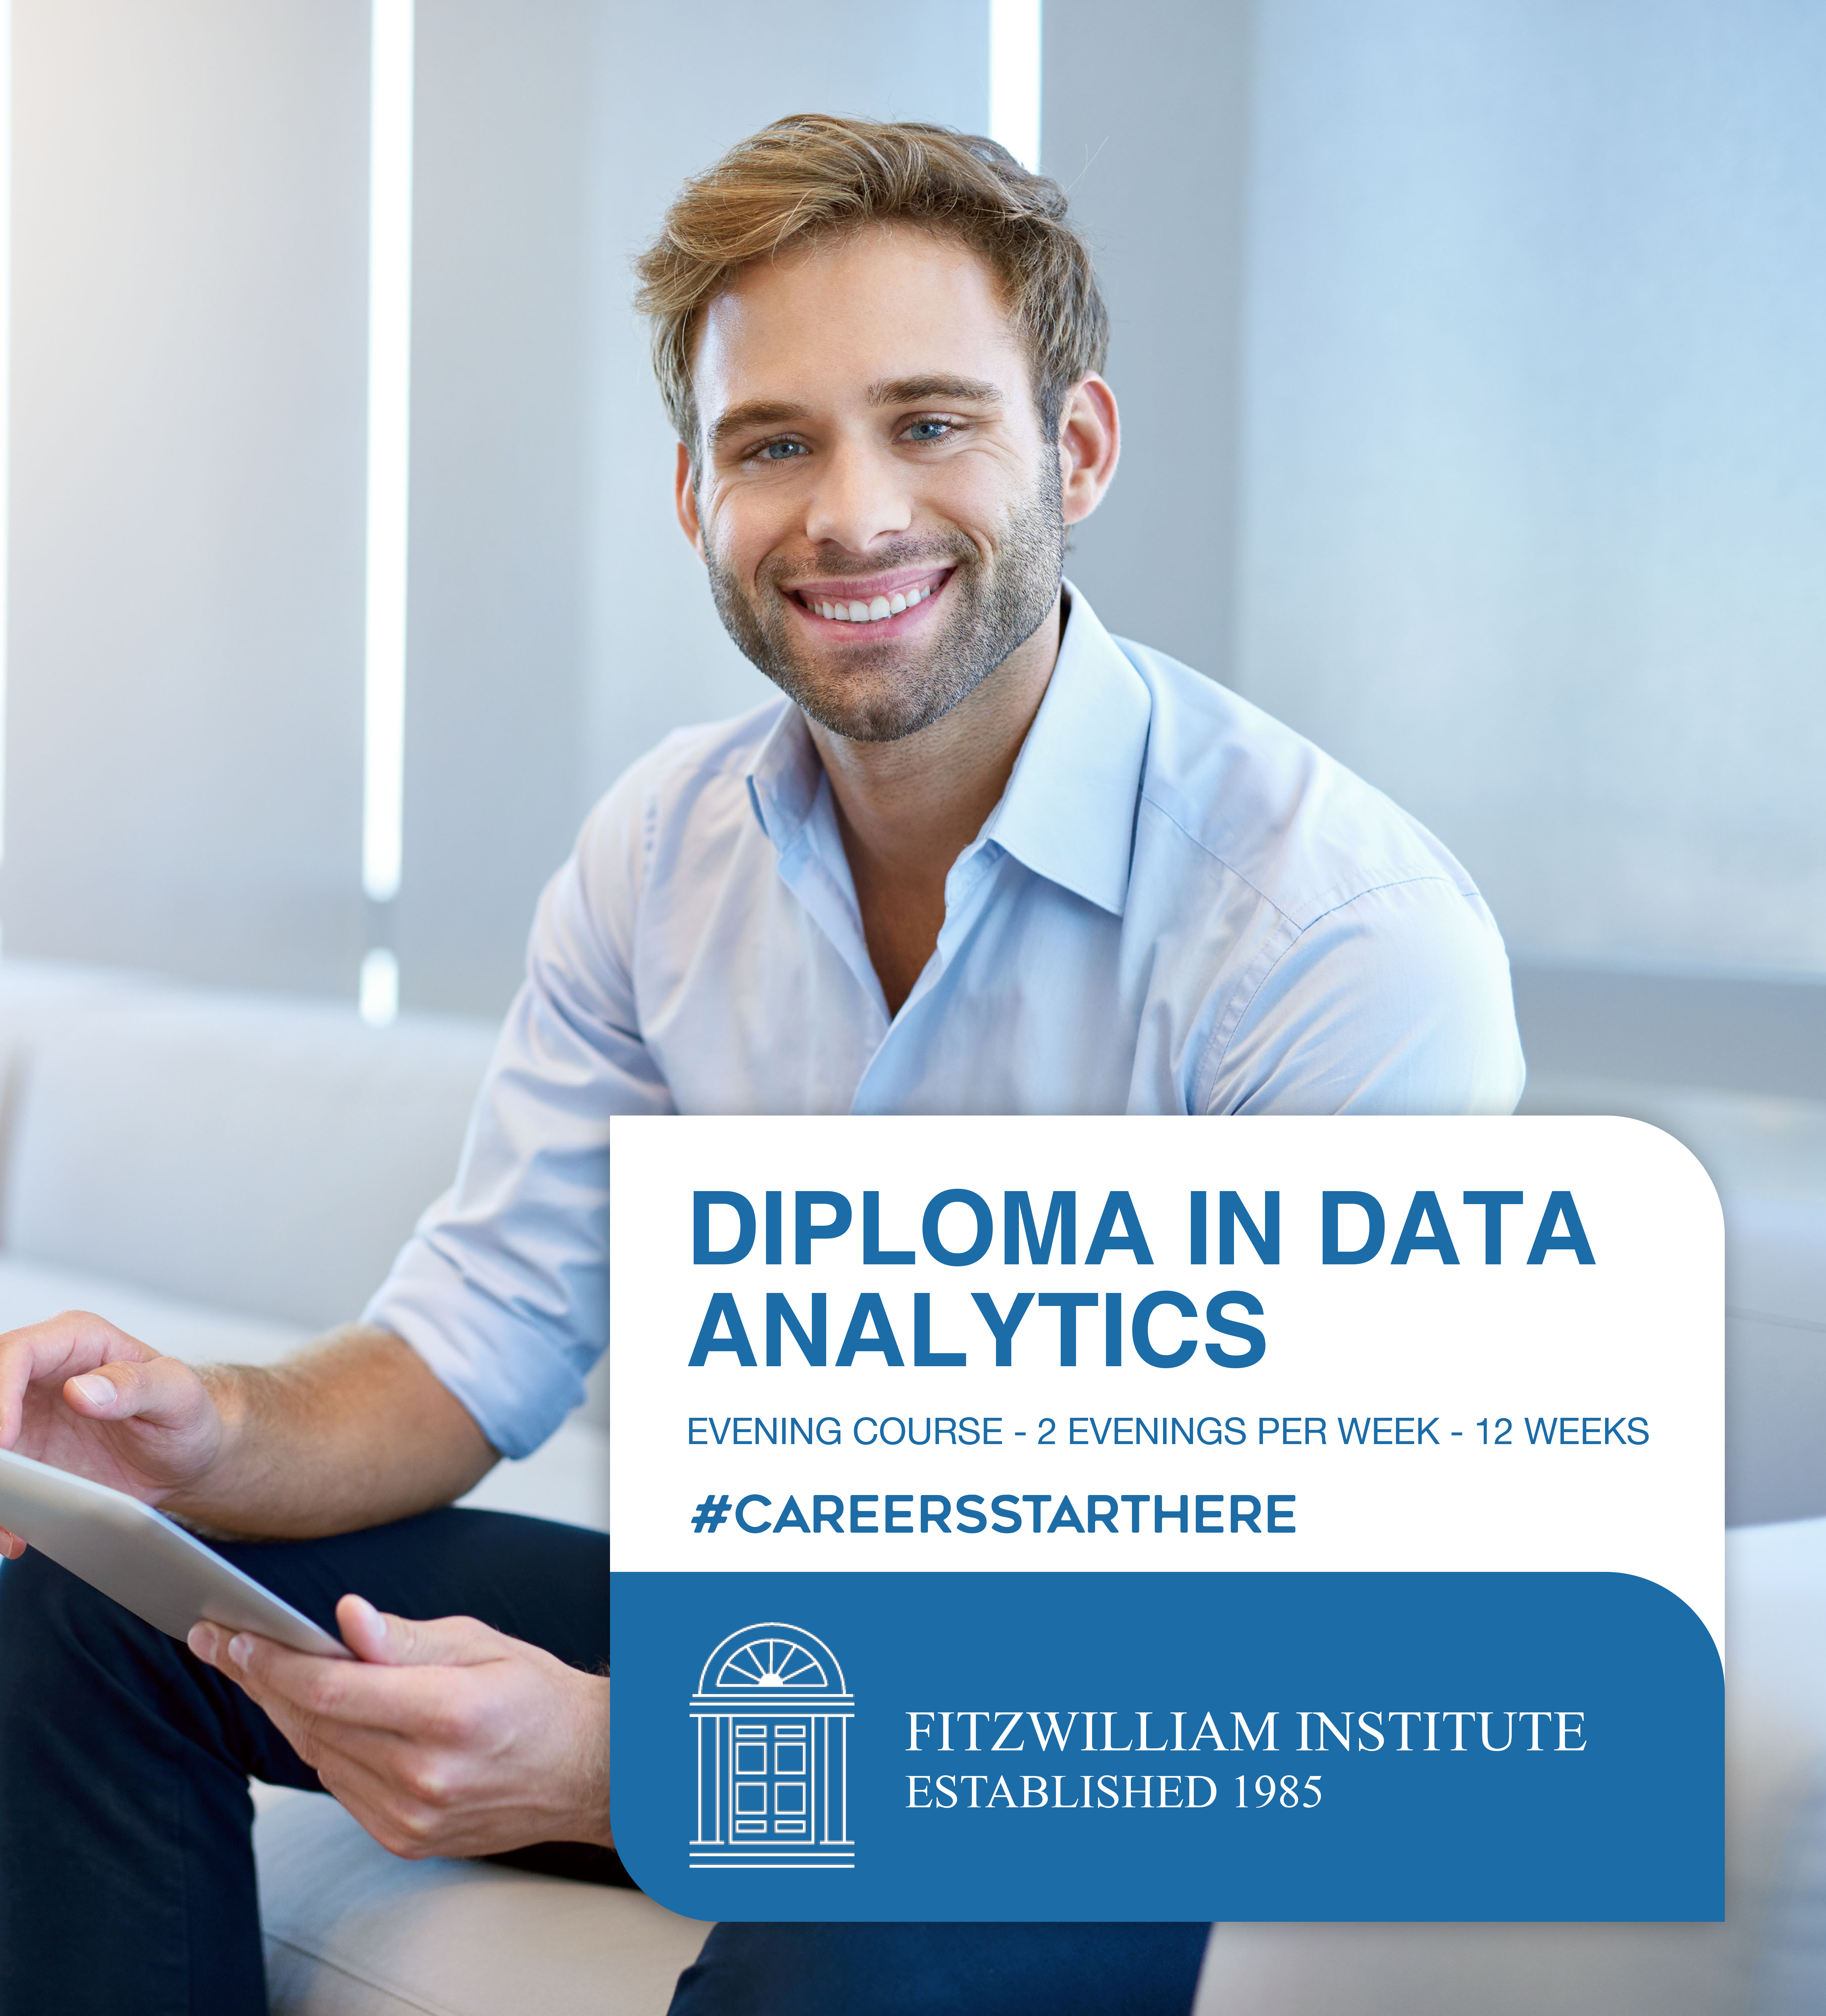 Diploma-in-Data-Analytics-Part-time-evening-course.jpg